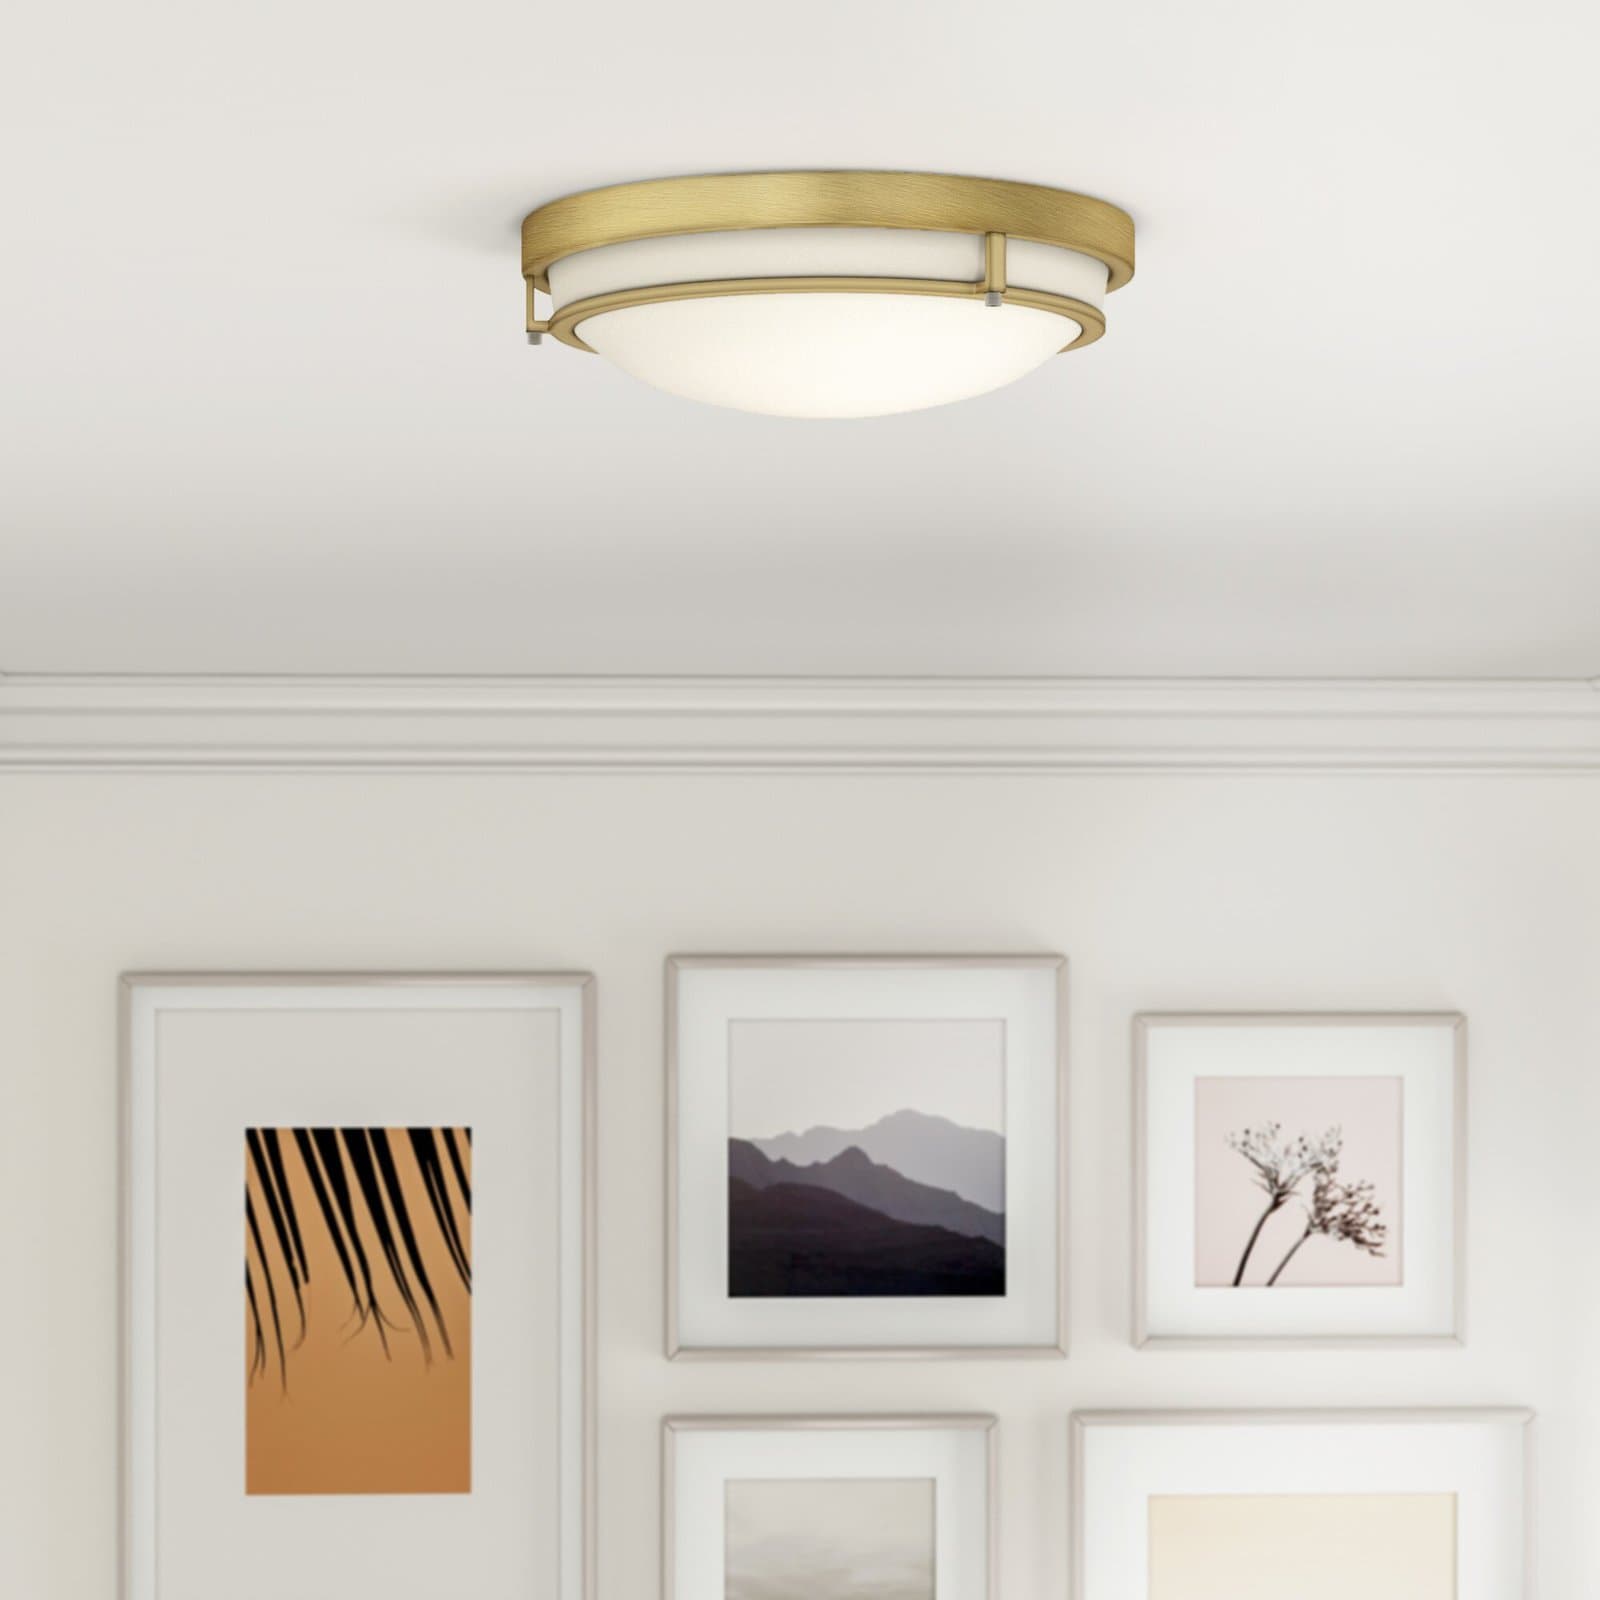 Keep It Simple with a Flush Mount Fixture